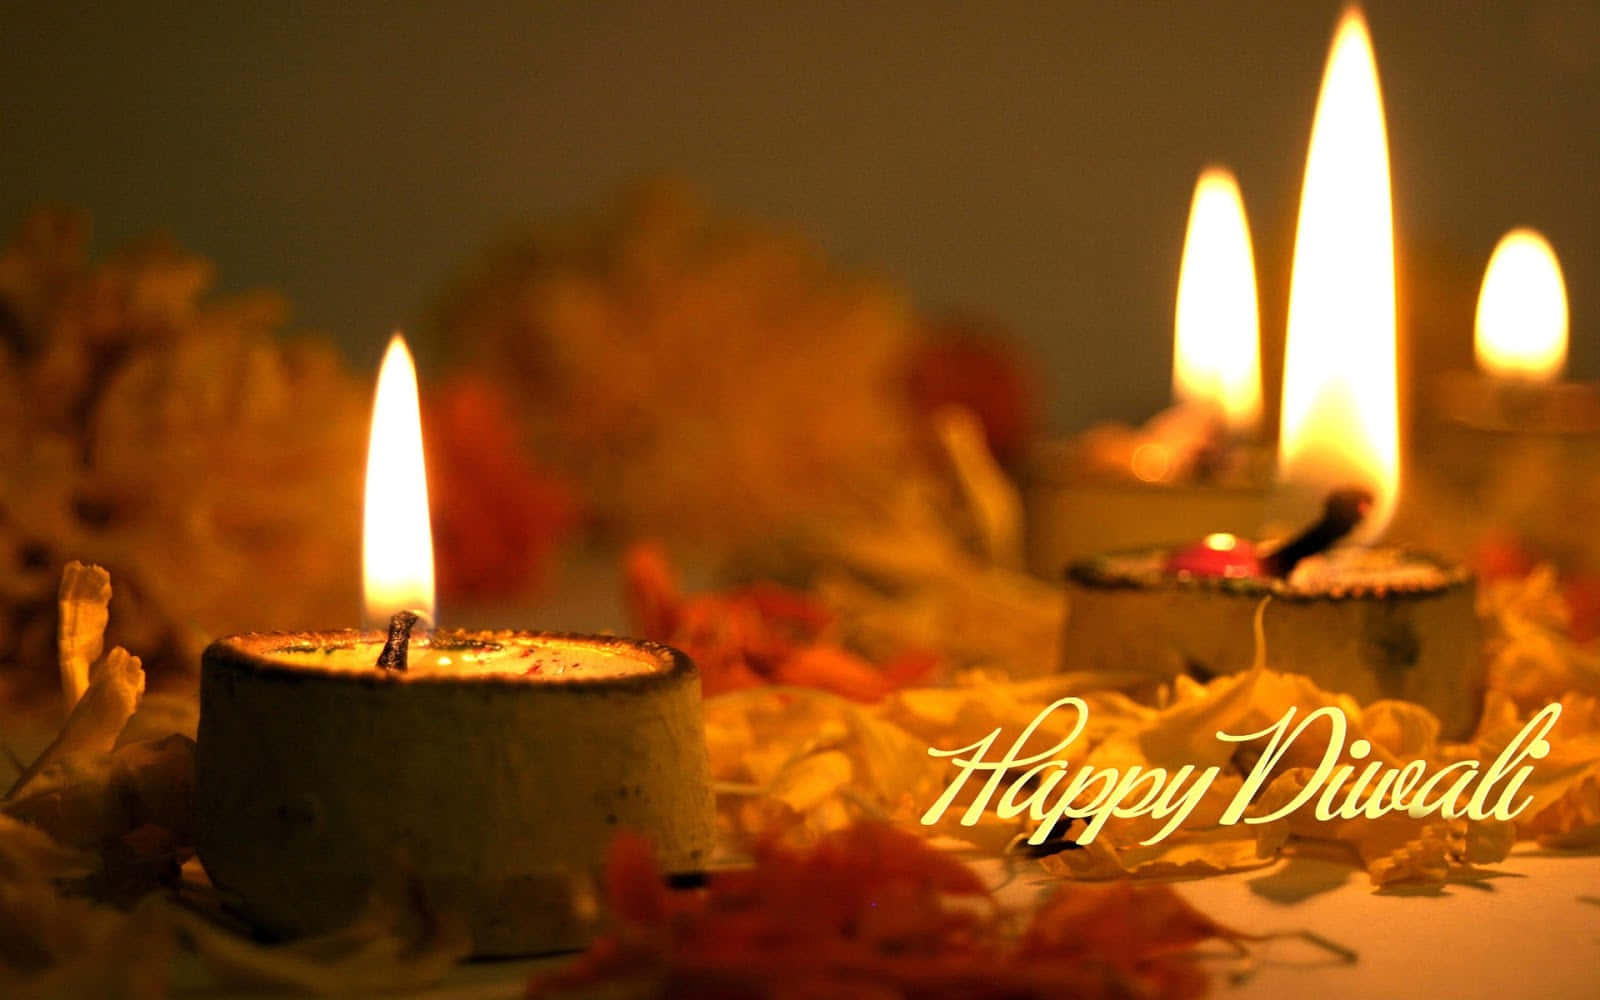 Happy Diwali Images With Candles And Flowers